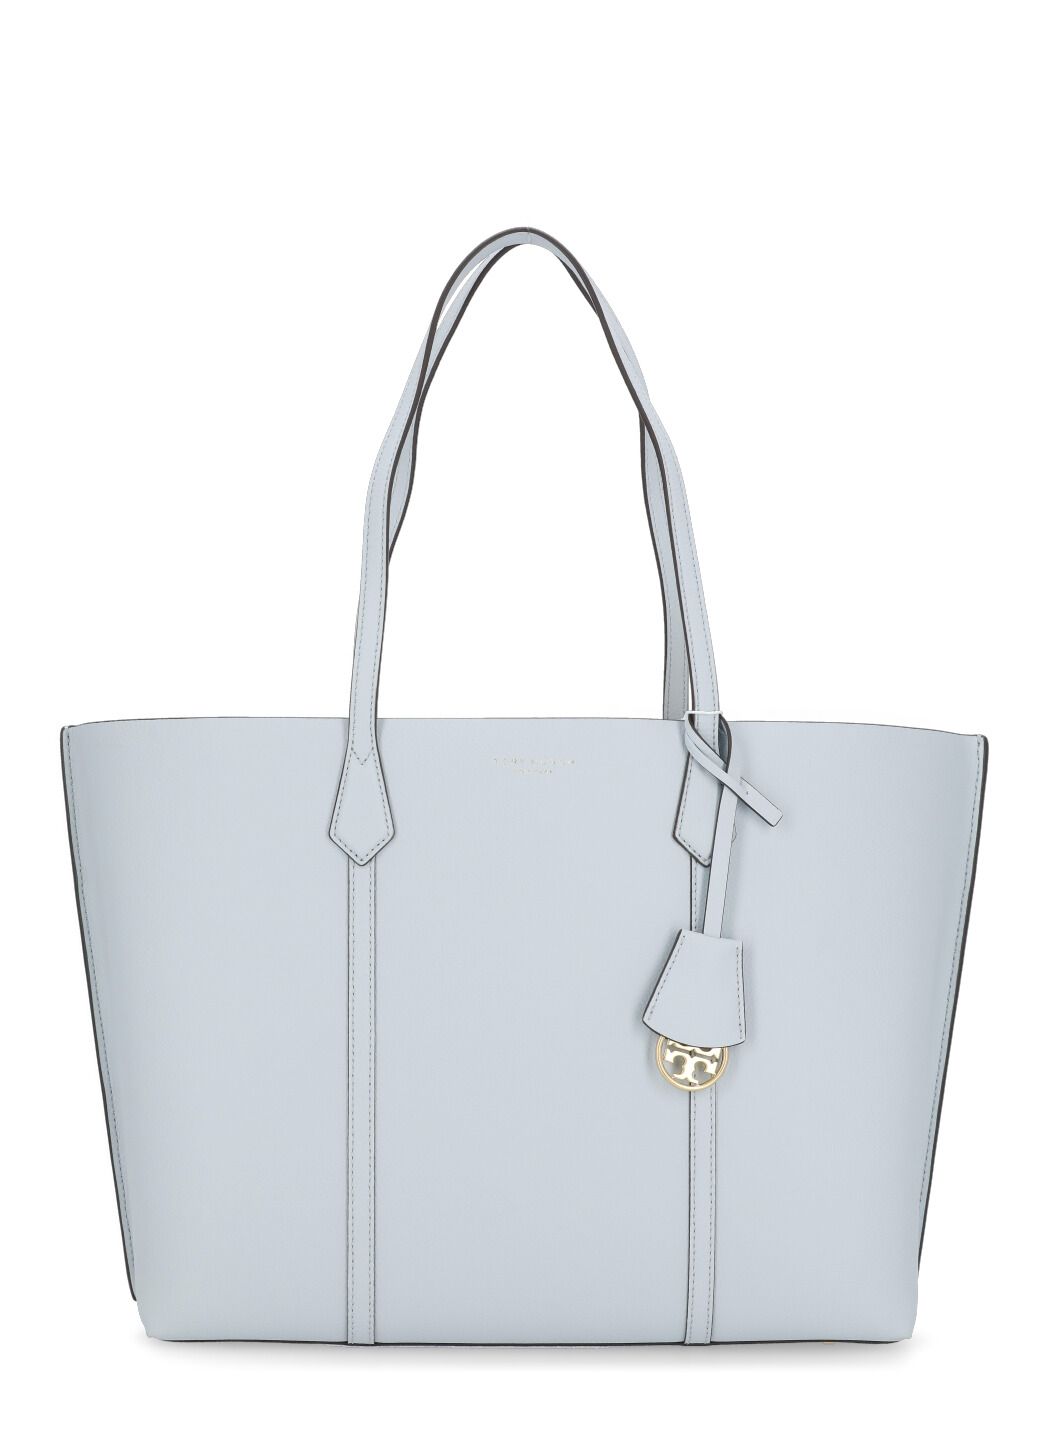 tory burch perry tote grey